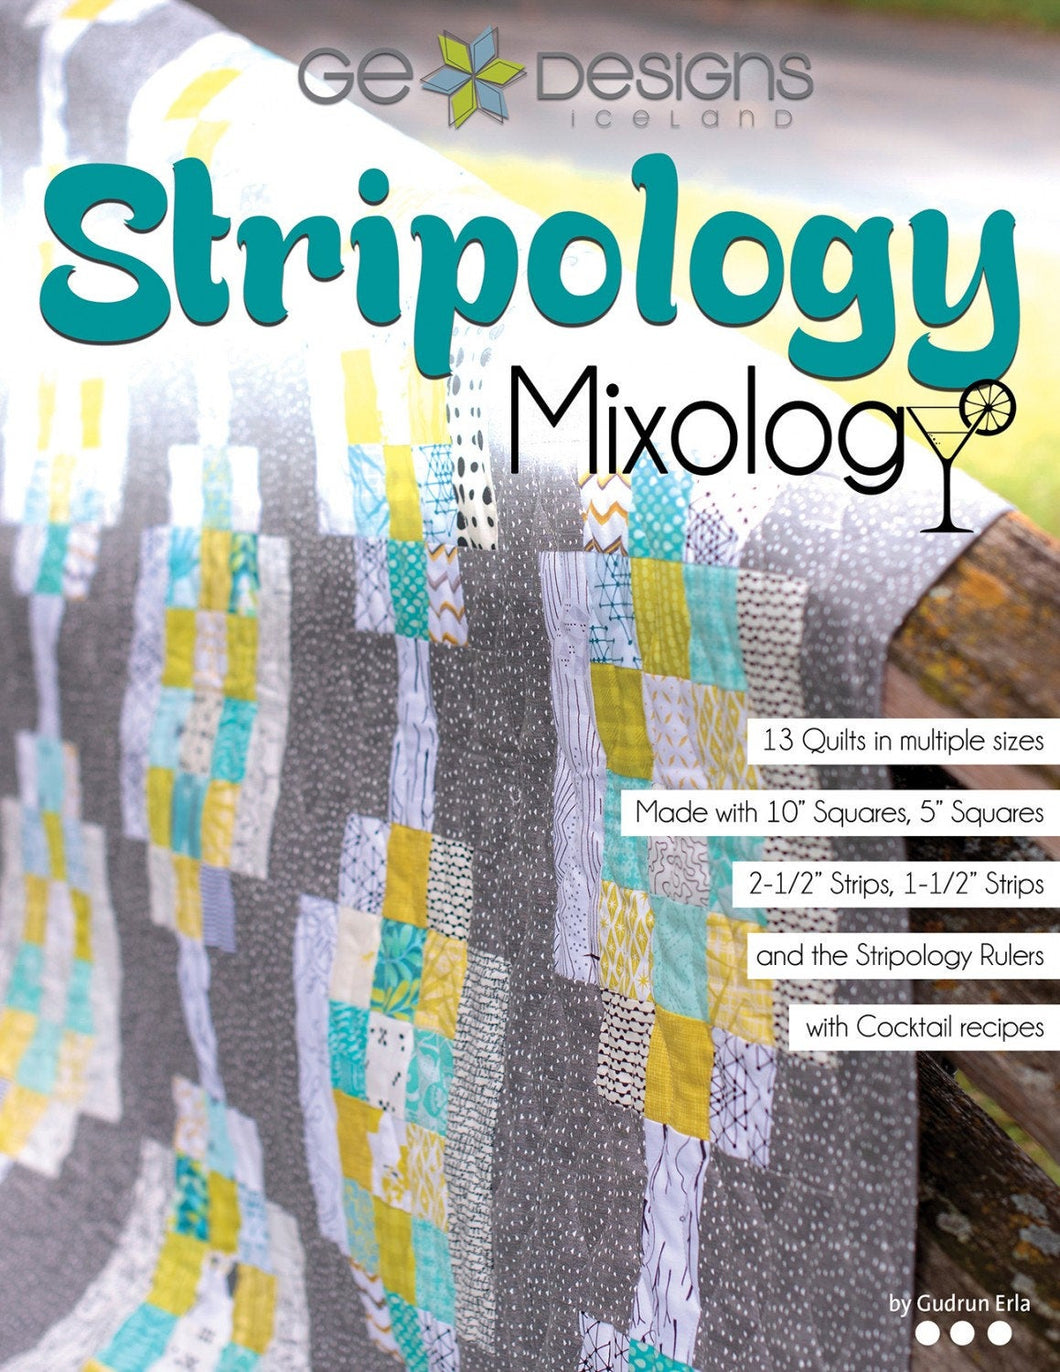 STRIPOLOGY MIXOLOGY by Gudrun Erla from G. E. Designs